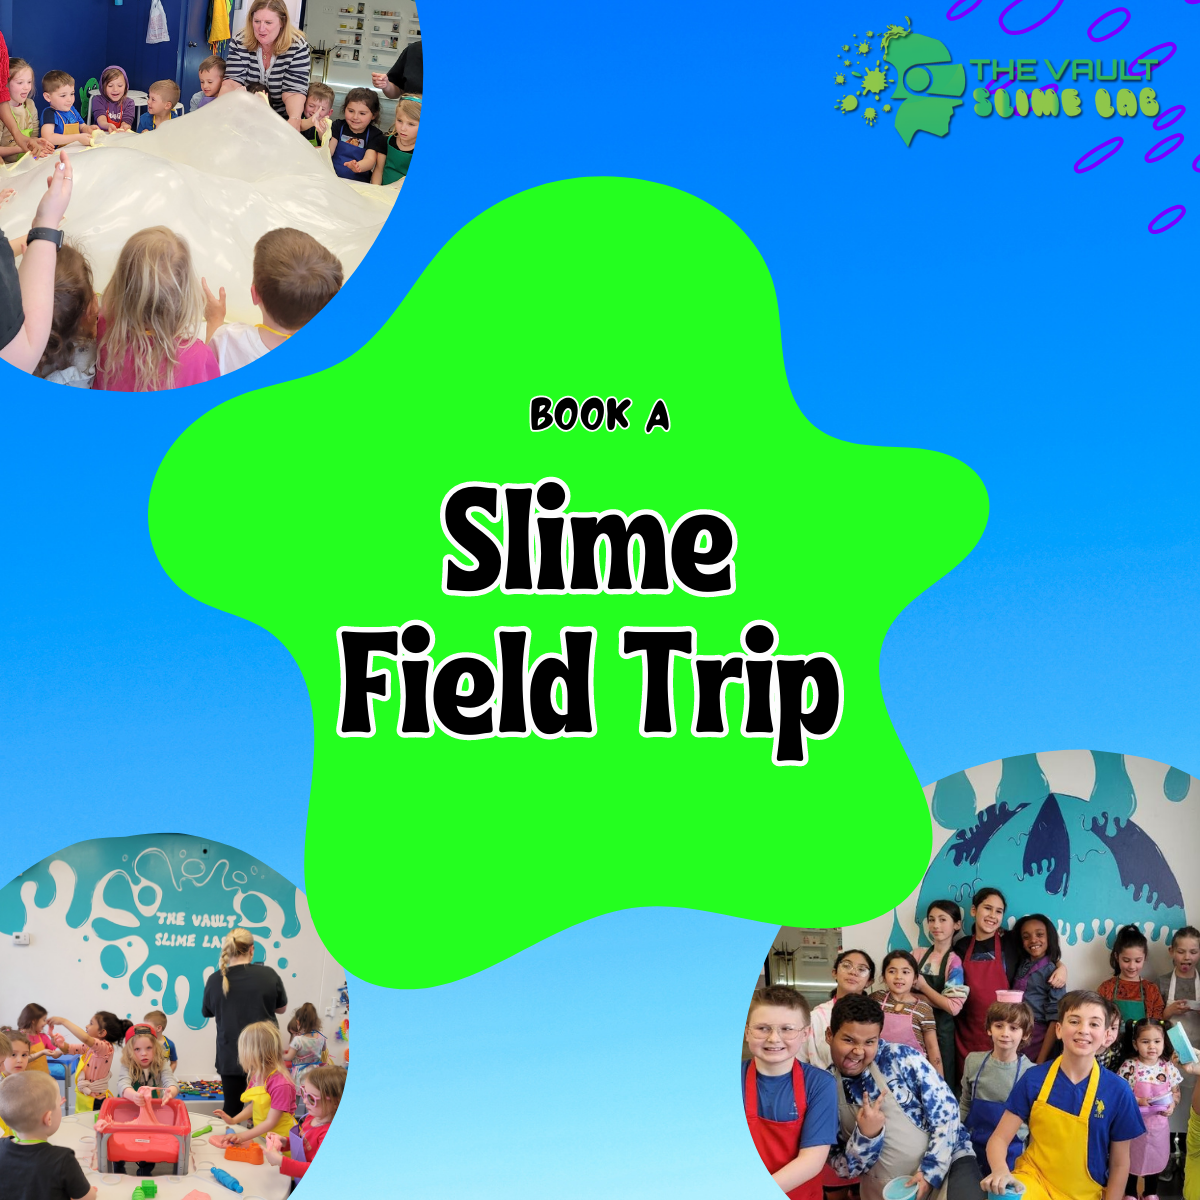 book a slime field trip at the vault slime lab